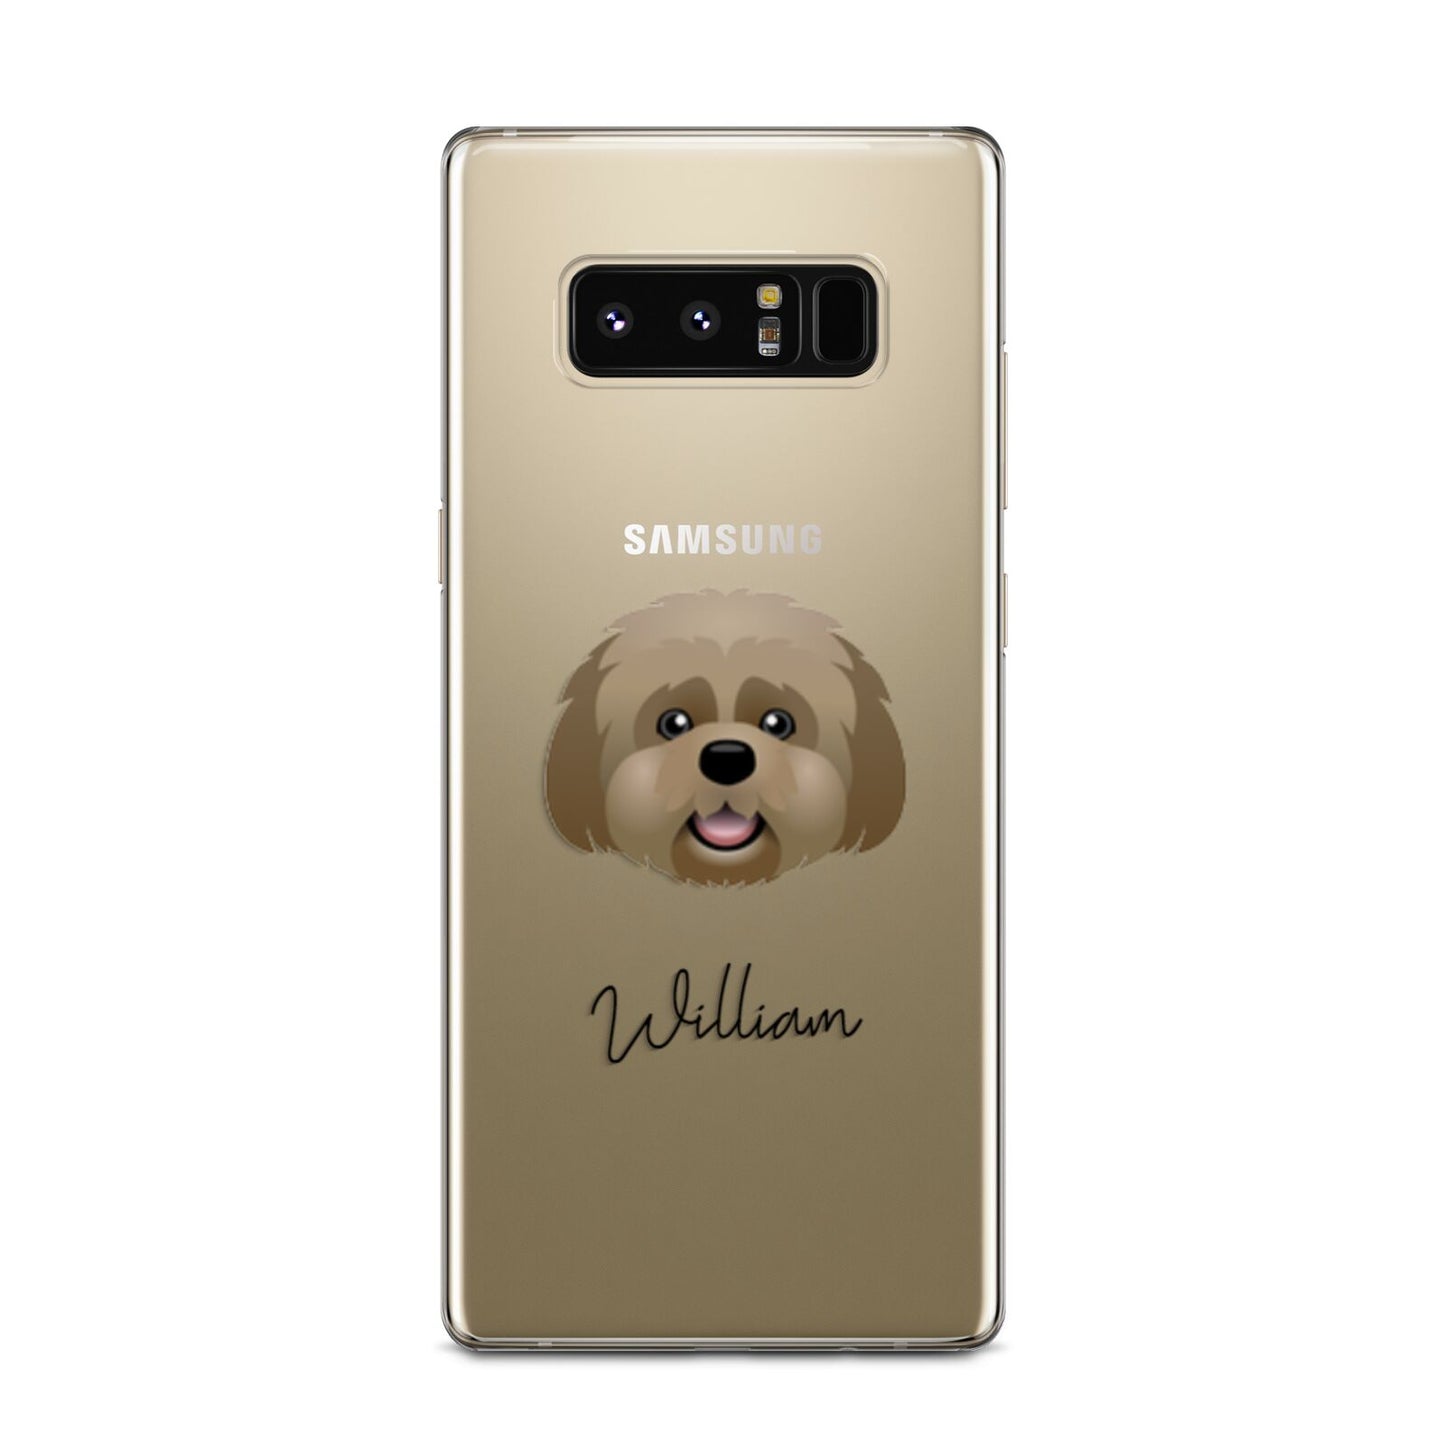 Lhatese Personalised Samsung Galaxy Note 8 Case